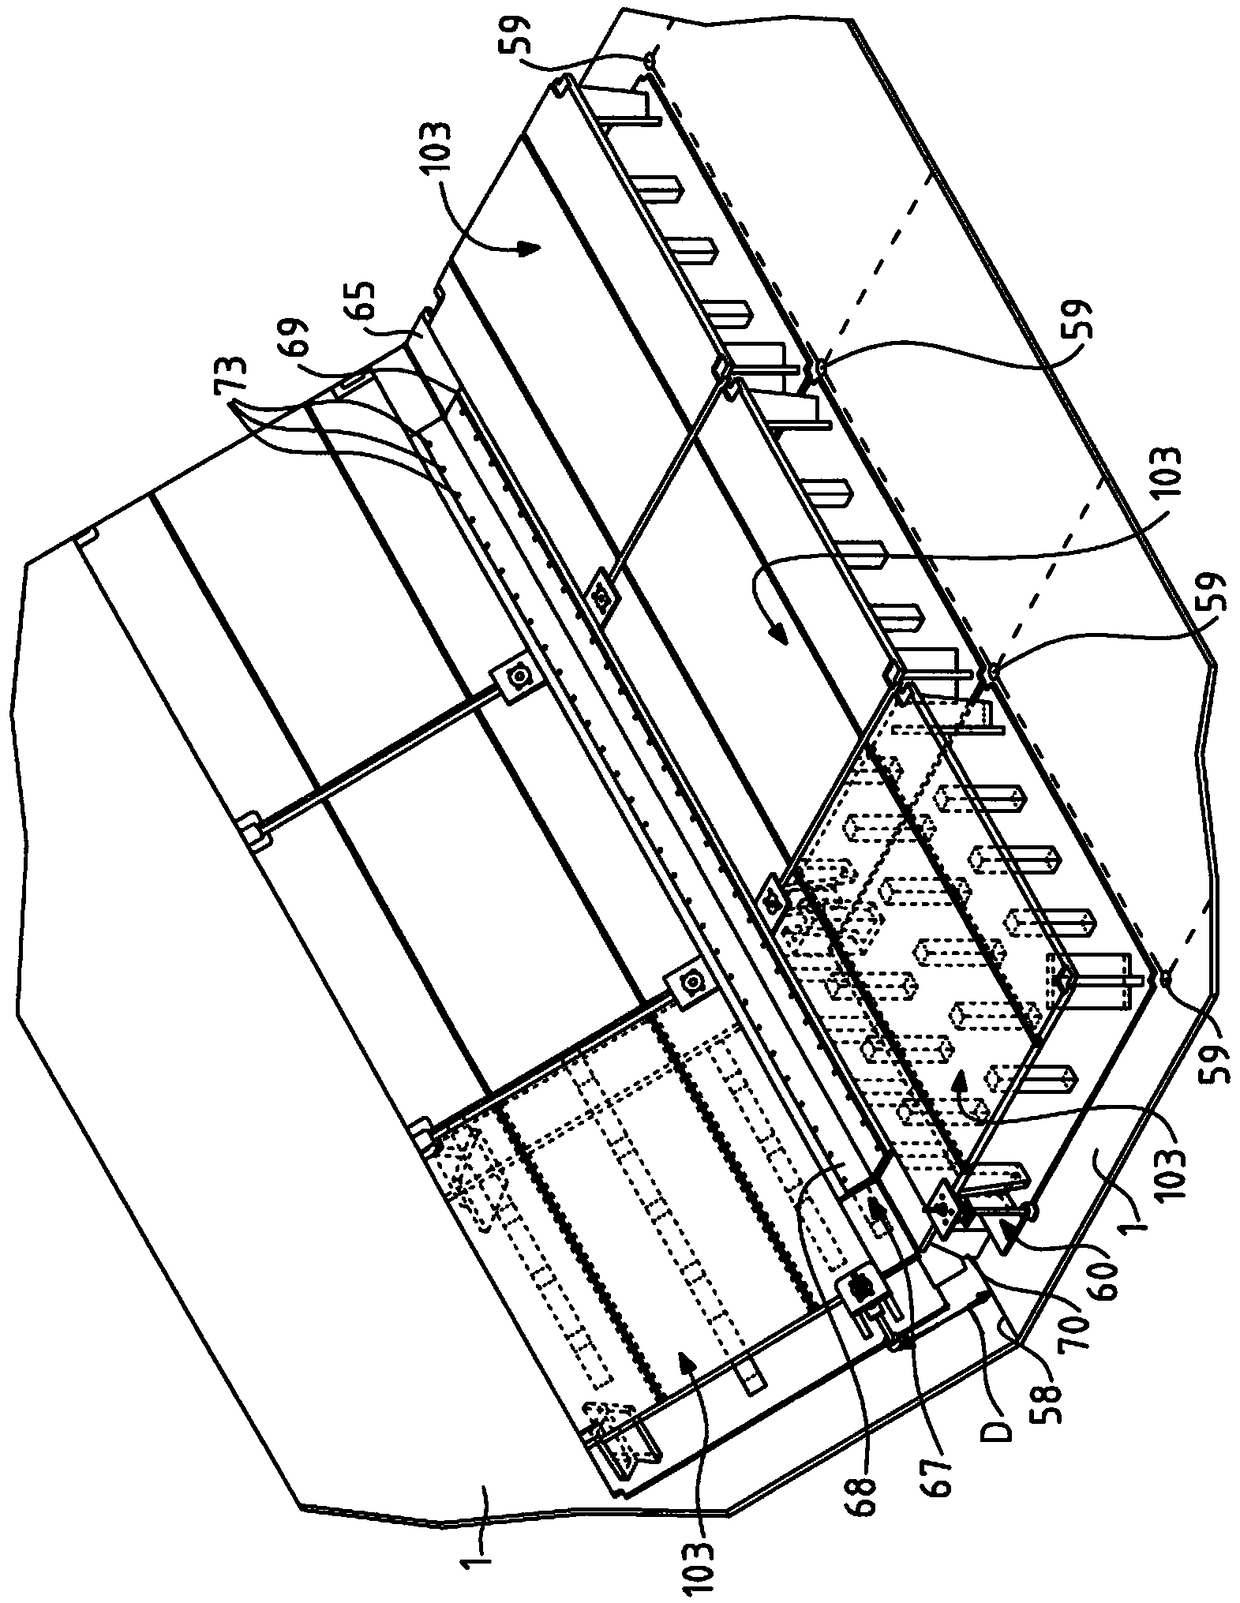 Insulating block and thermally-insulating sealed tank built into a polyhedral load-bearing structure